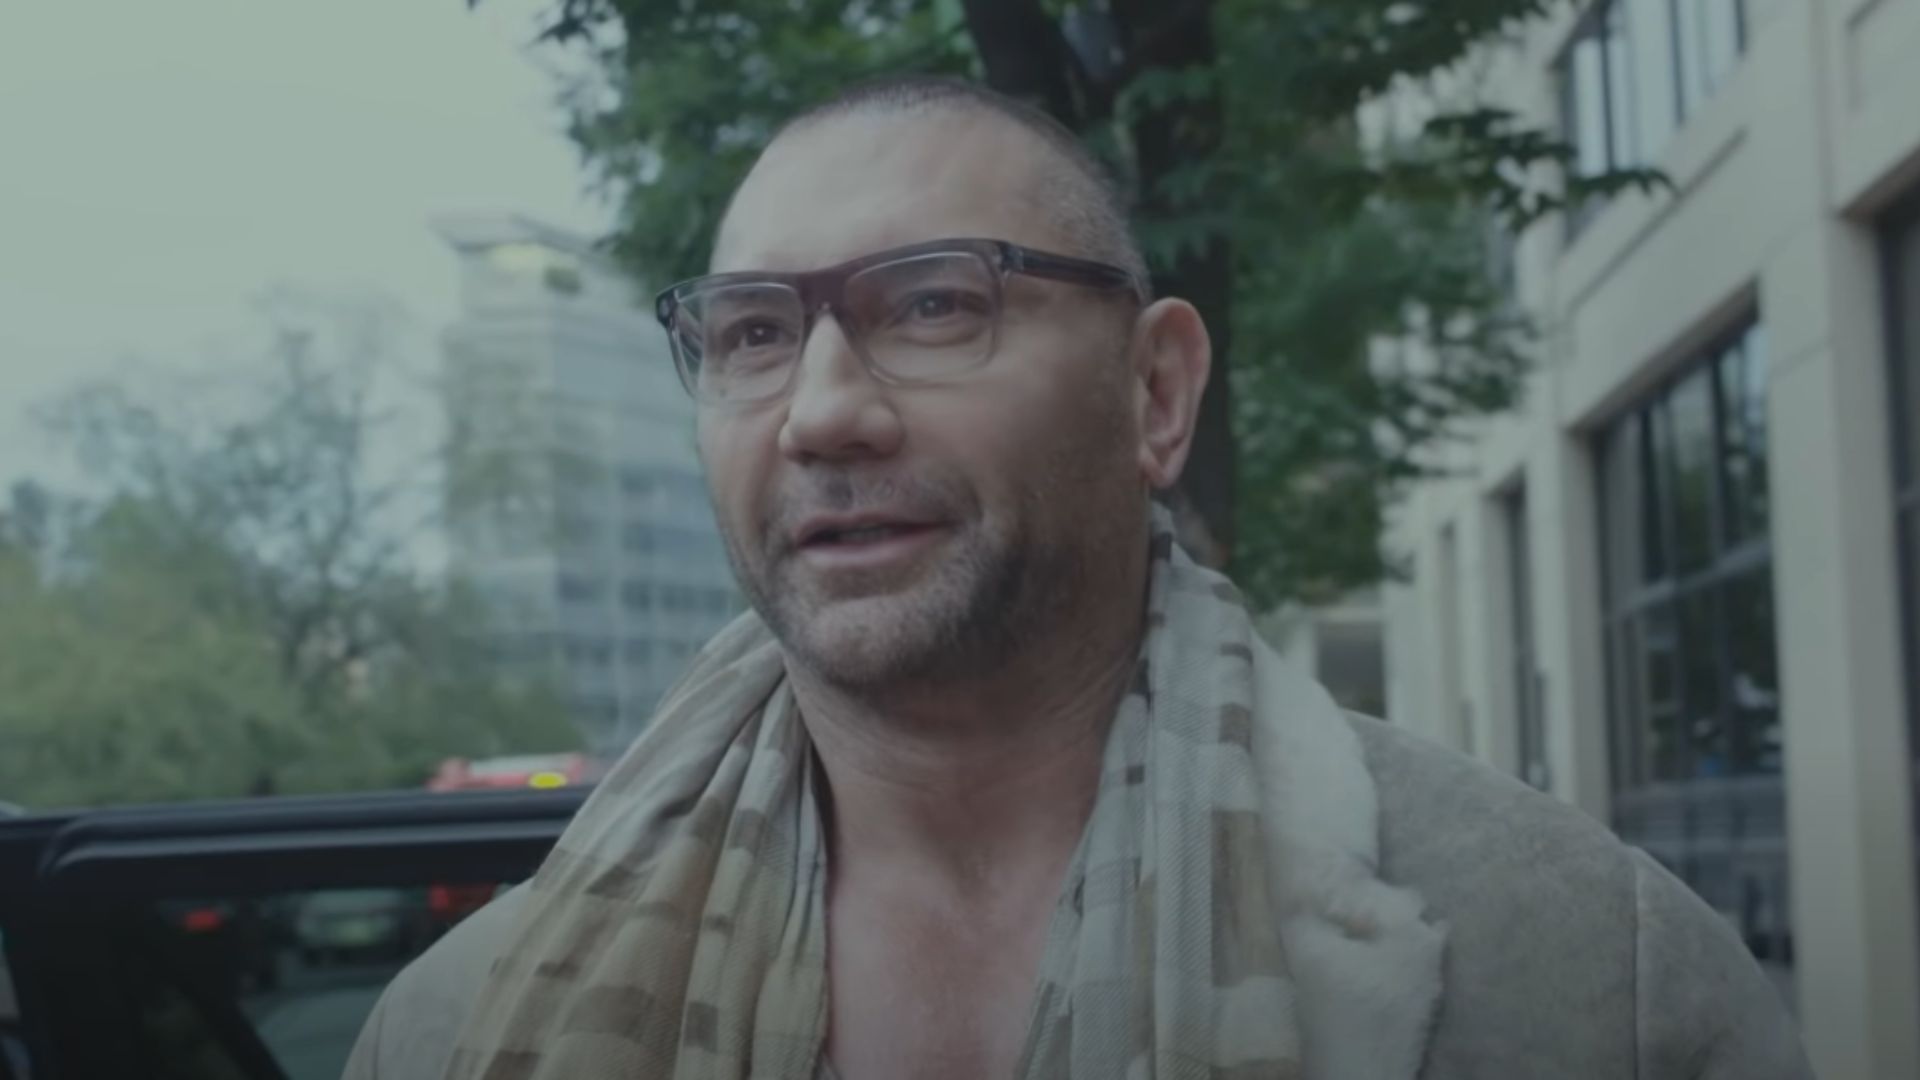 Batista was one of the top WWE stars of the 2000s.